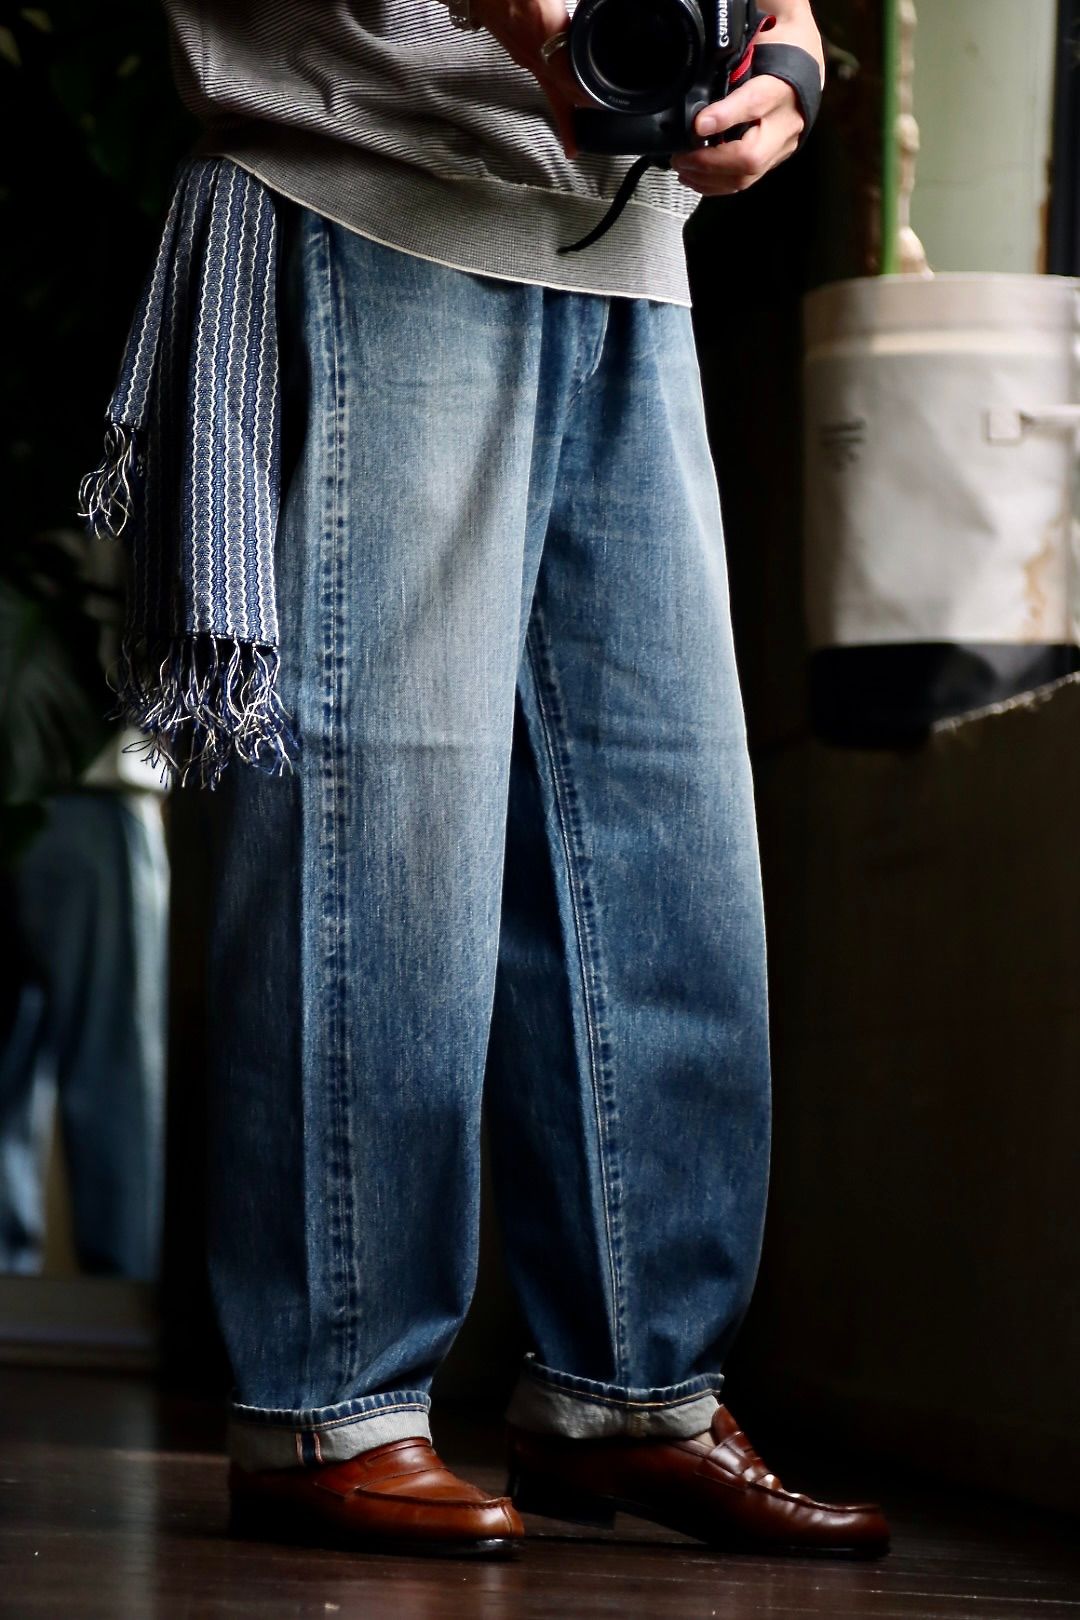 A.PRESSE - アプレッセ23AWデニム No.22 Washed Wide Denim Pants 